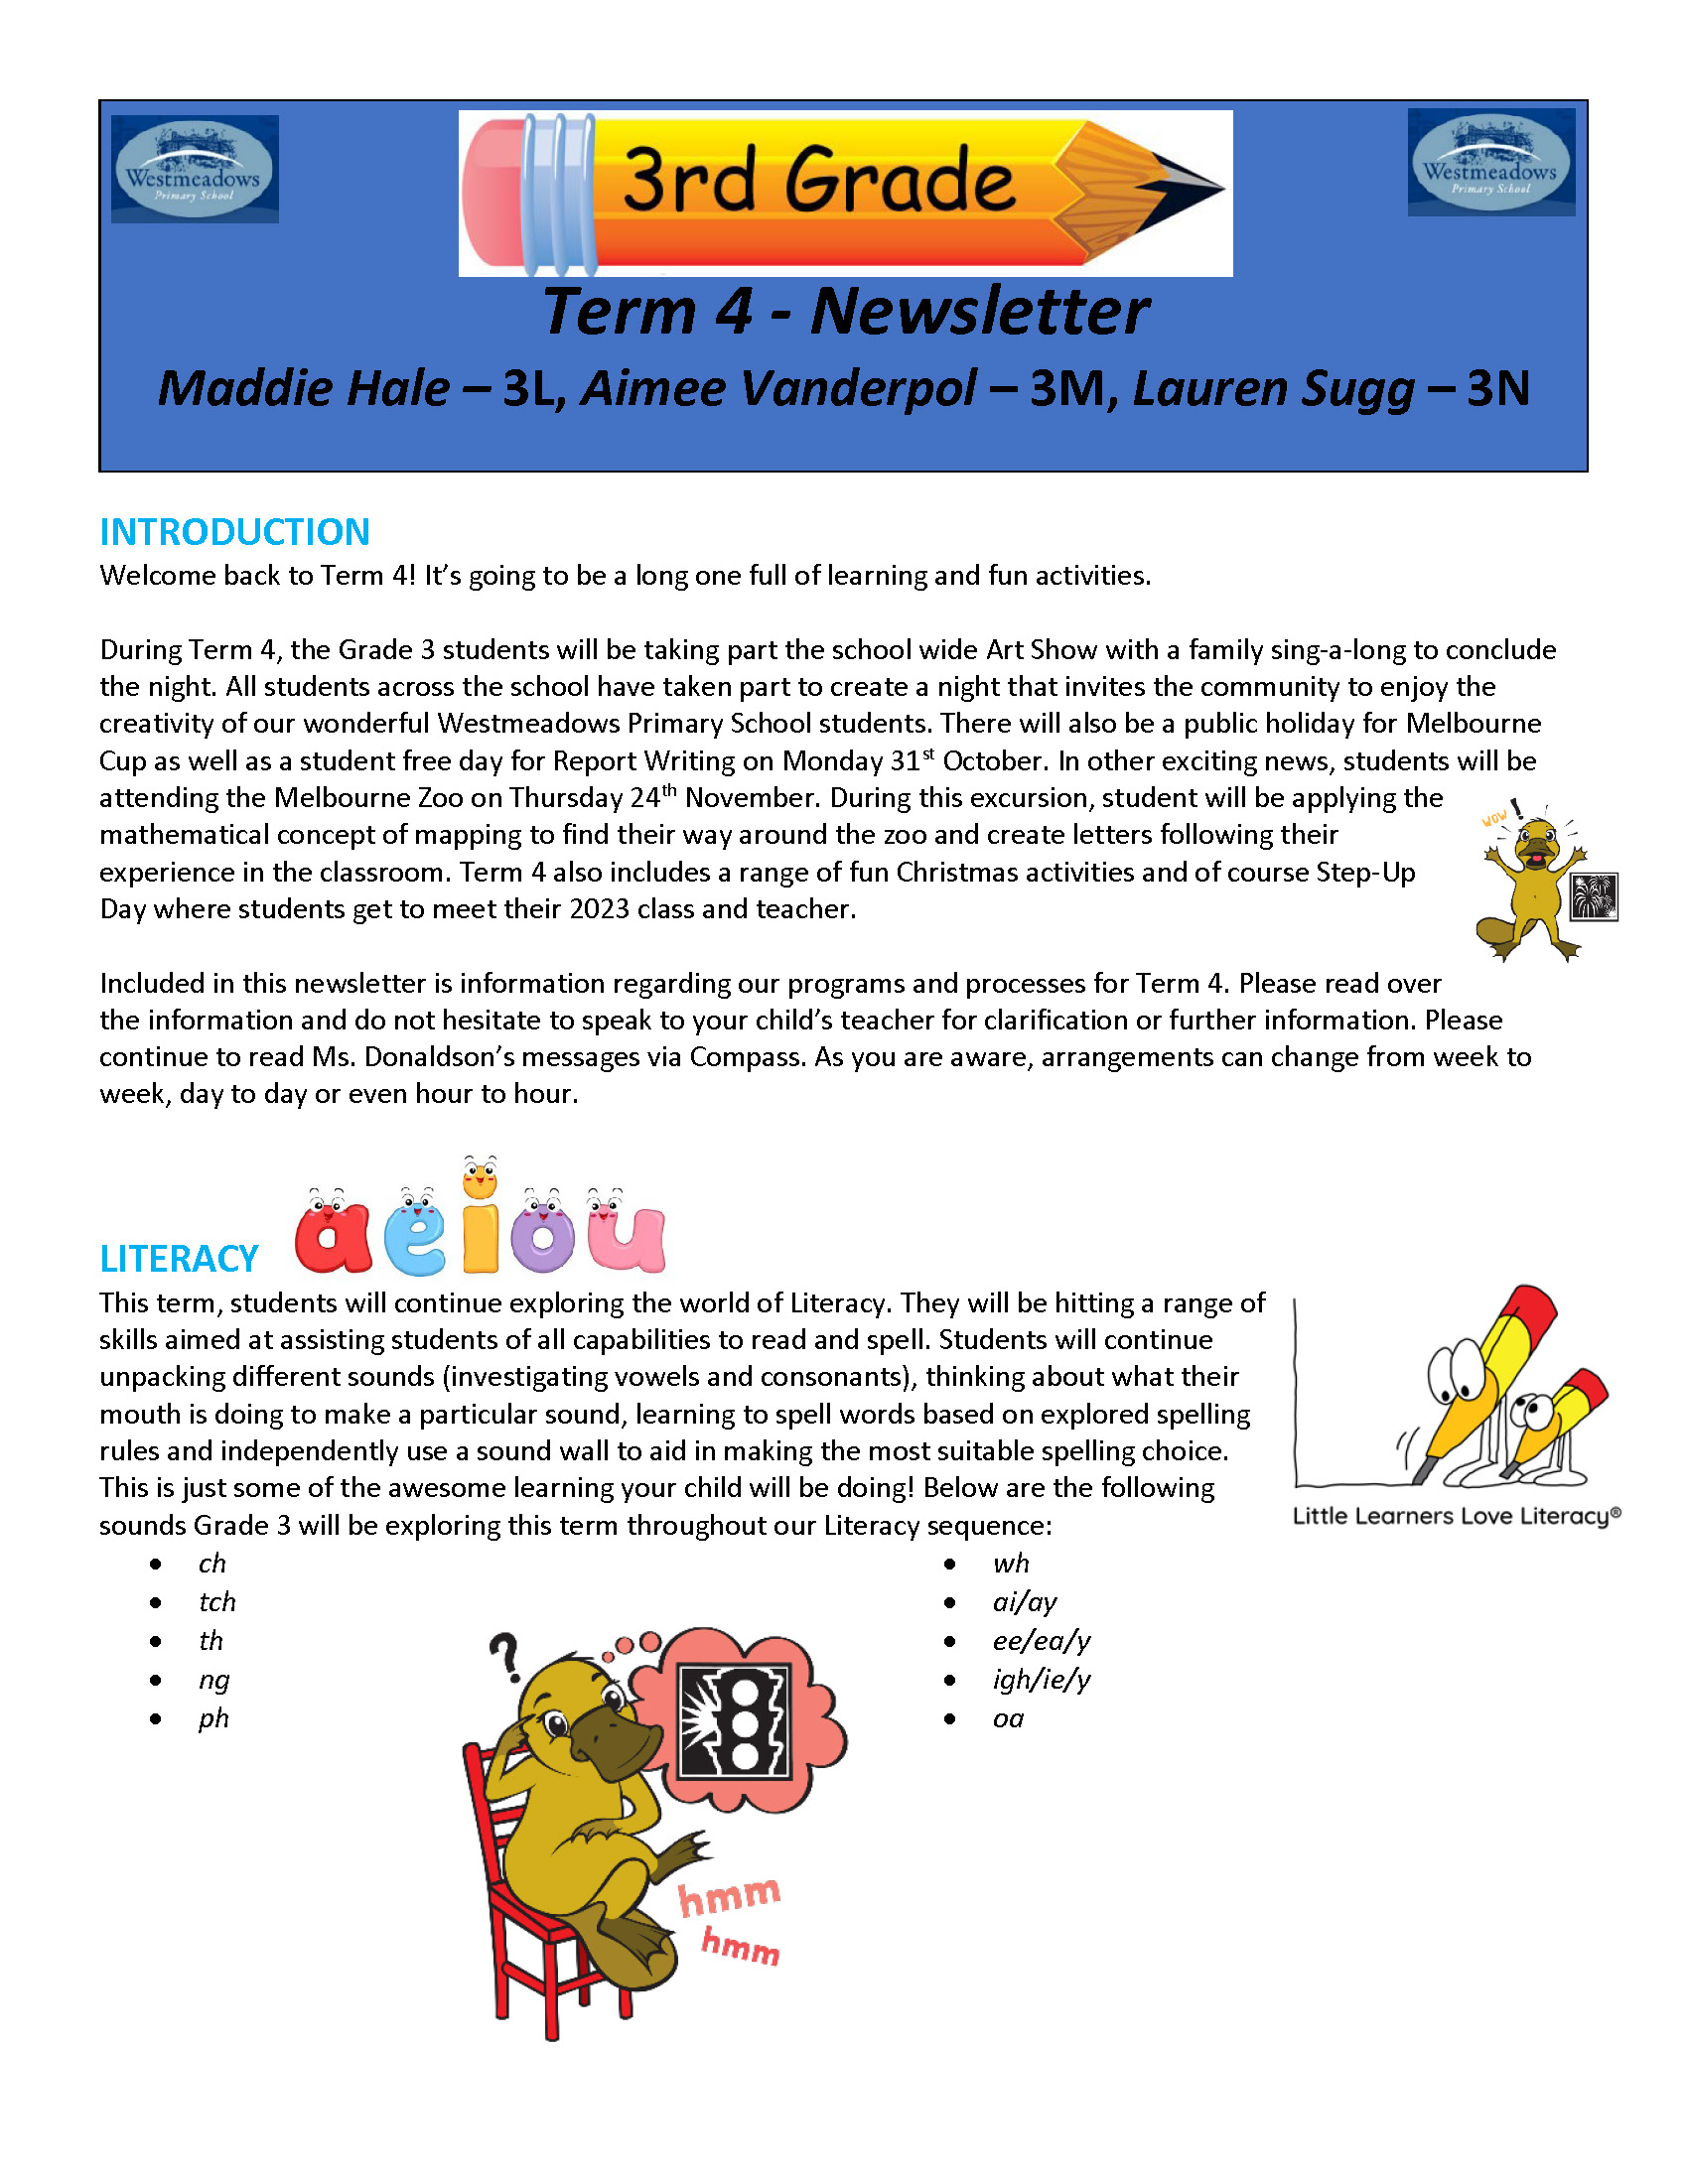 Grade 3 Term 4, 2022 Newsletter_Page_1